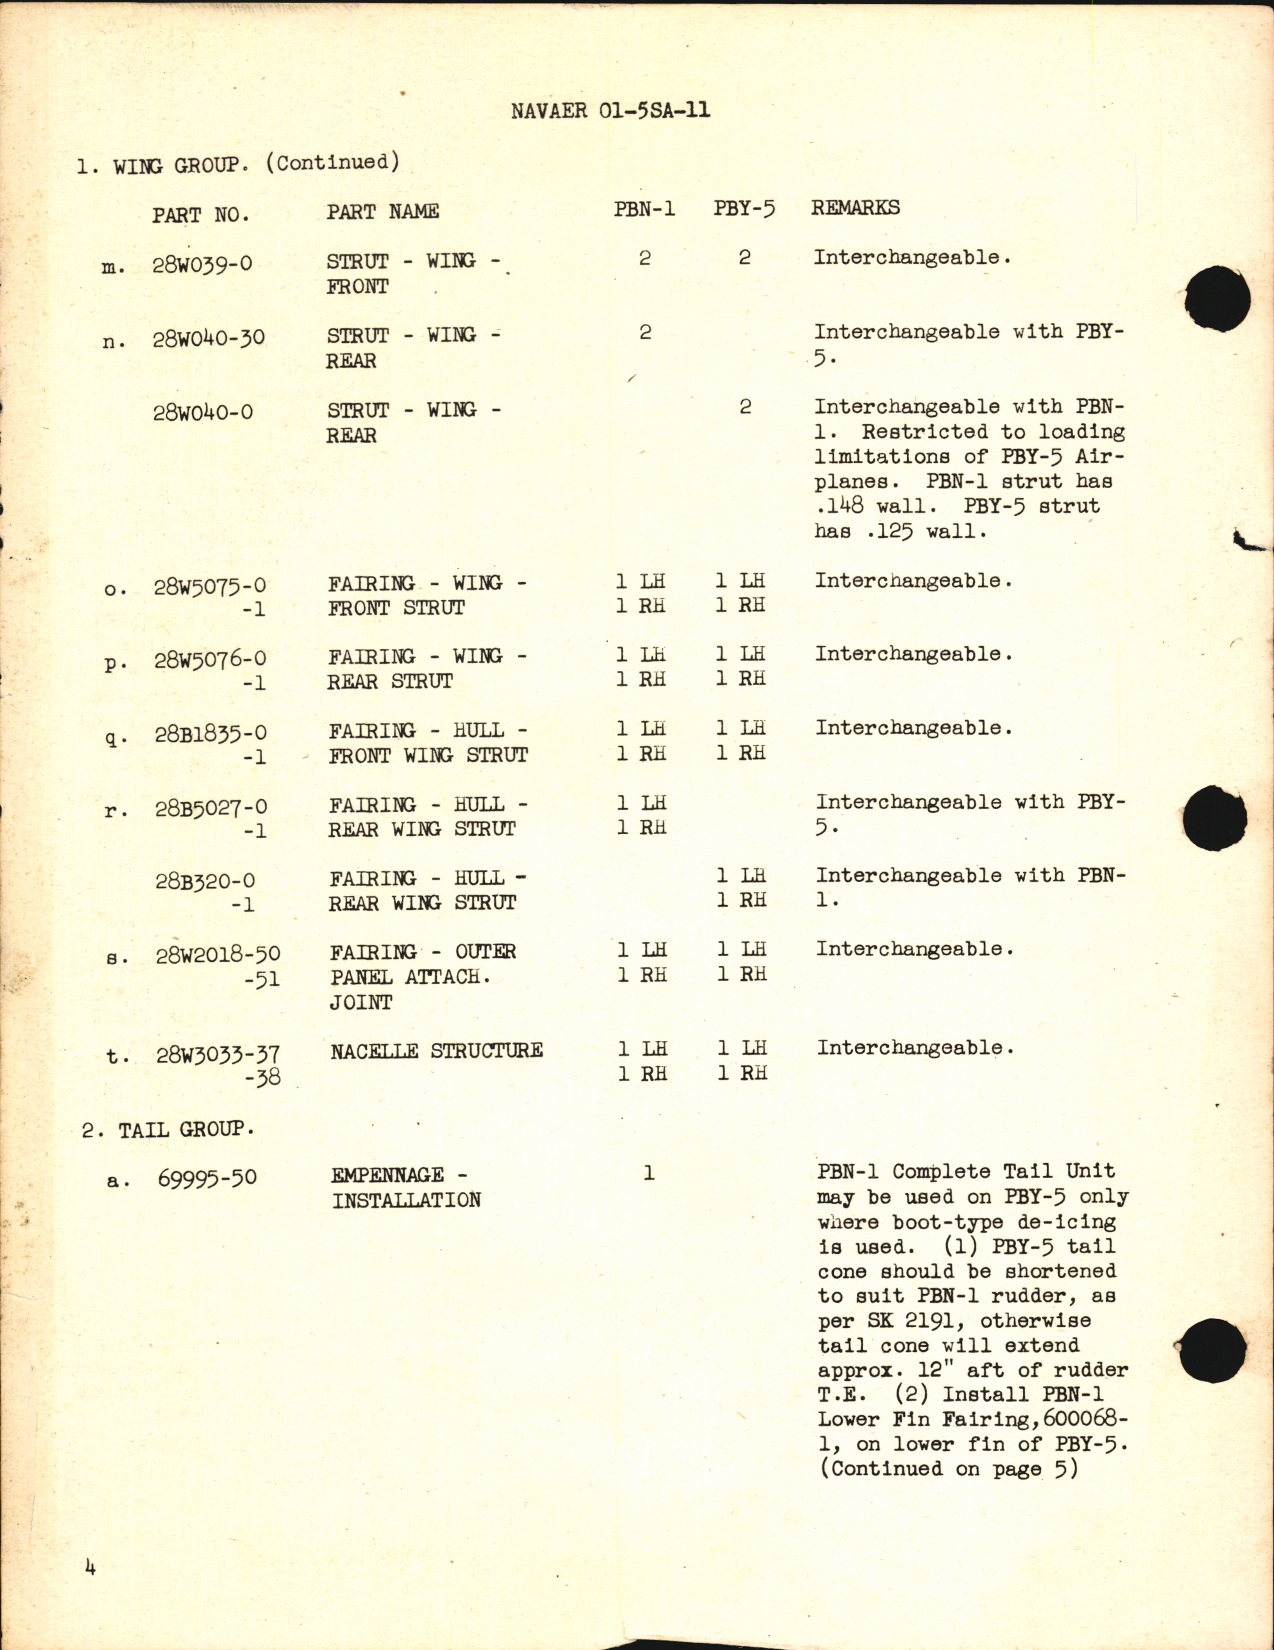 Sample page 6 from AirCorps Library document: Interchangeability List - Major Assemblies for Model PBN-1 and PBY-5 Airplanes